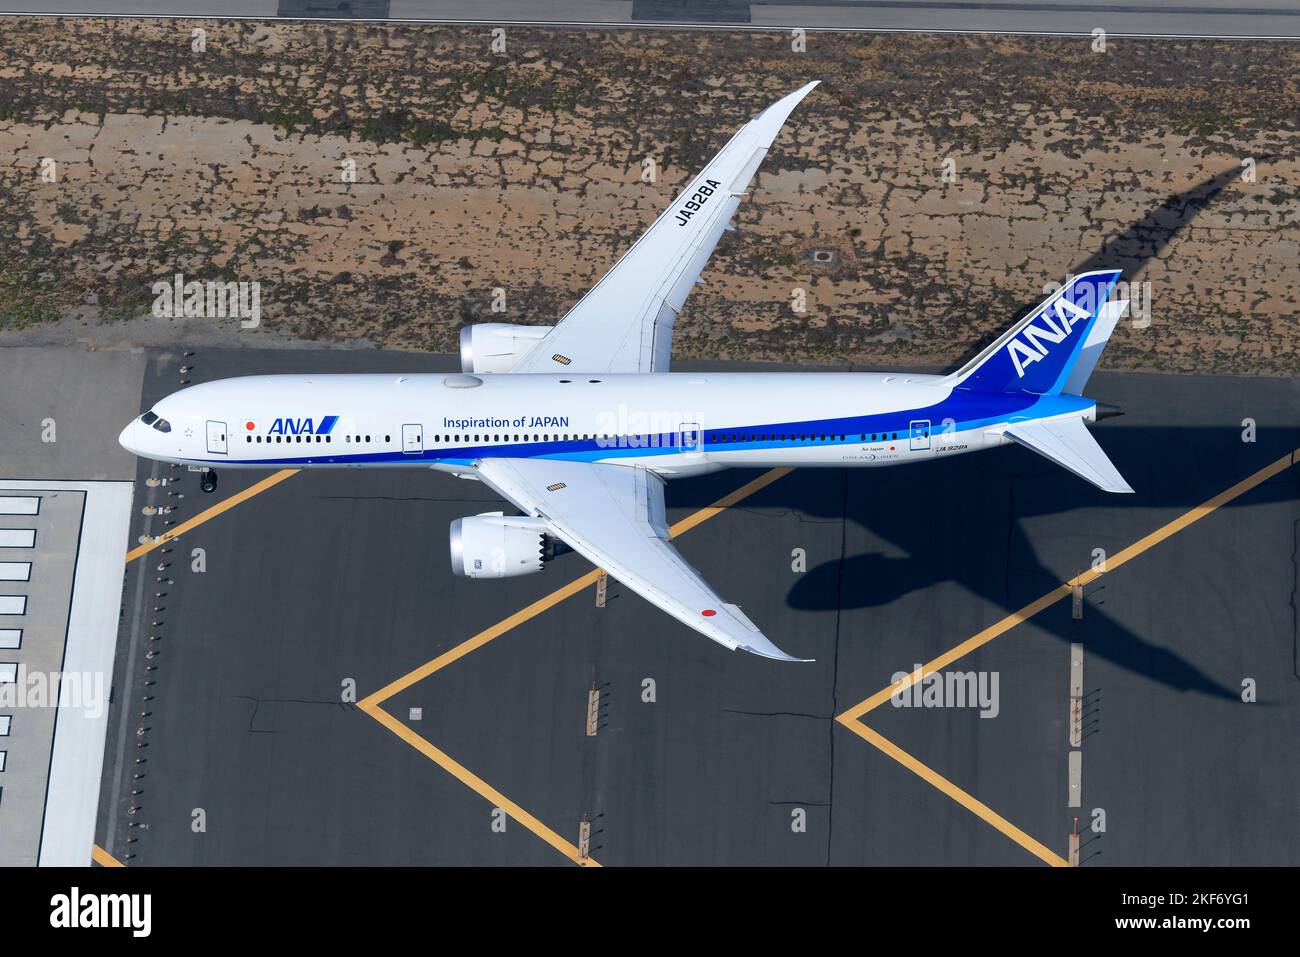 All Nippon Airways Boeing 787 Dreamliner aircraft about to land on runway. Airplane 787-9 of All Nippon, ANA registered as JA928A on final approach. Stock Photo